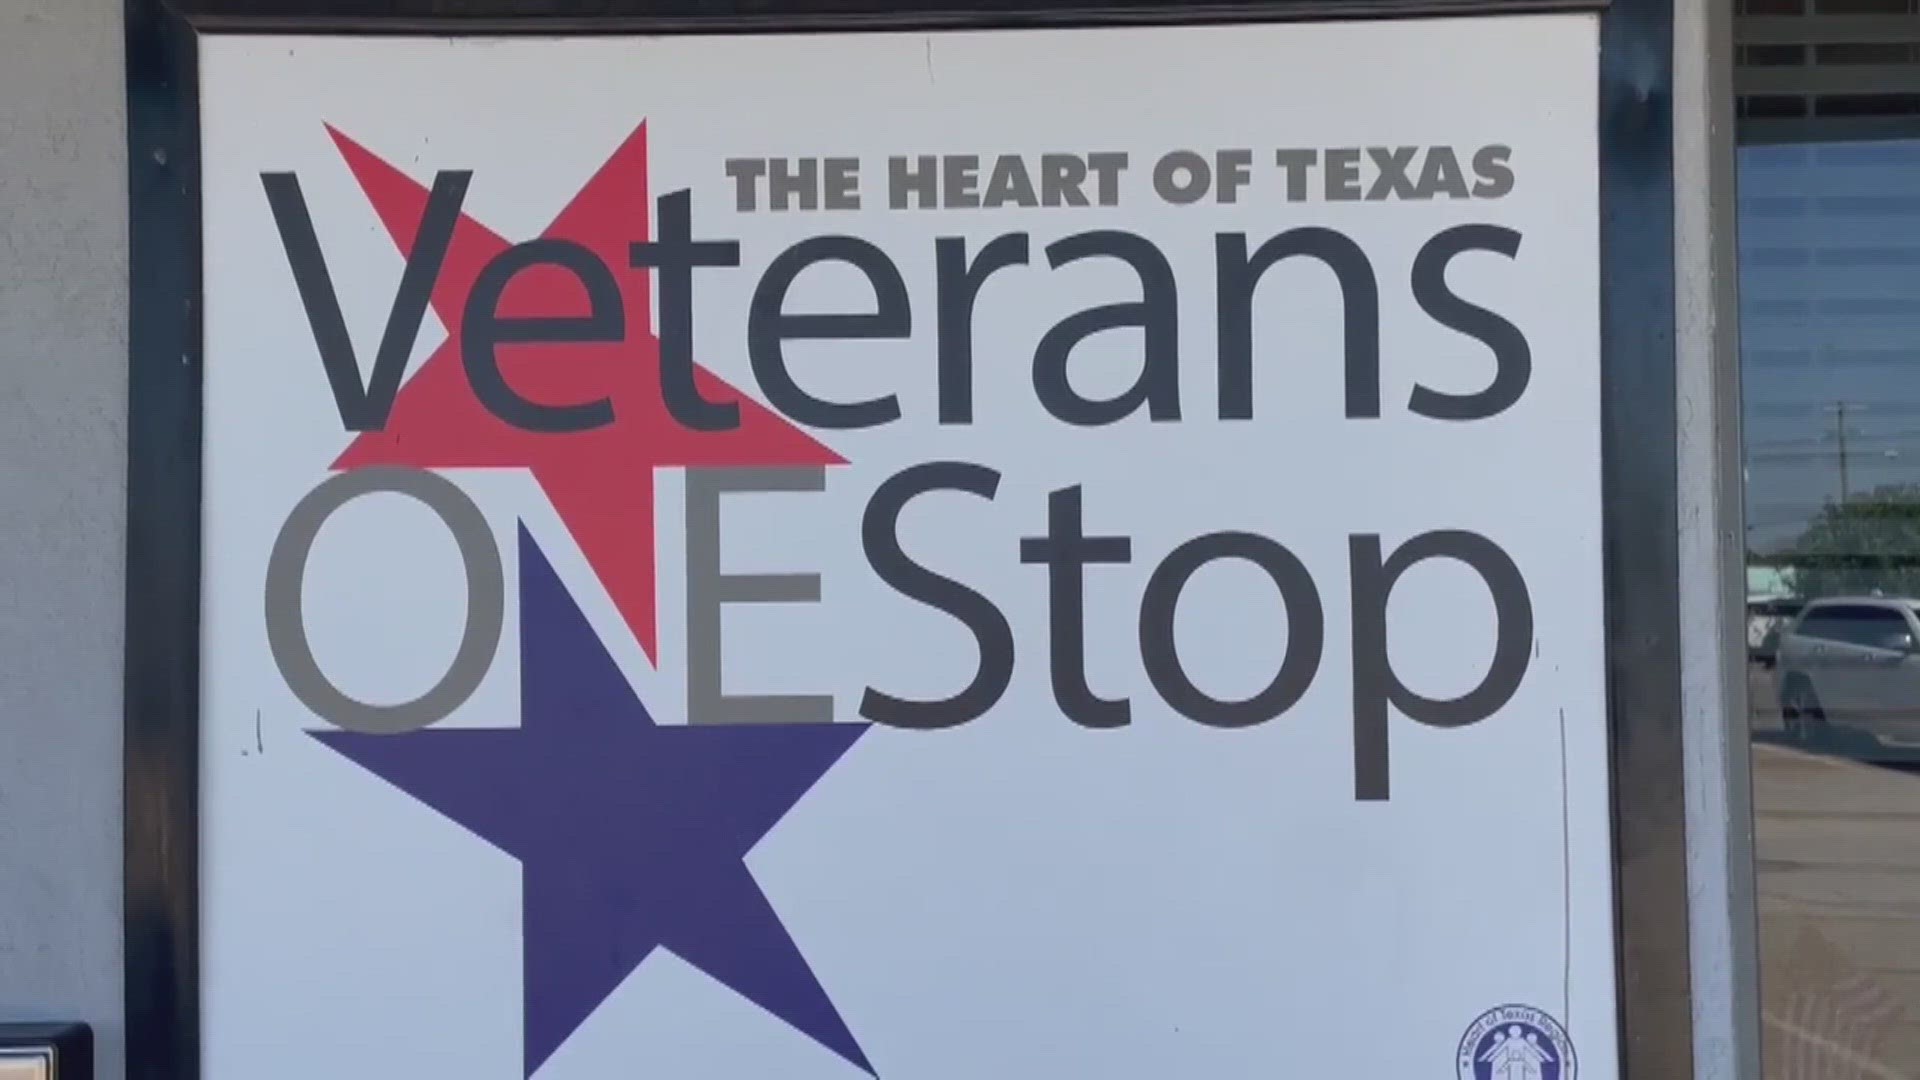 The Heart of Texas Veterans One Stop is offering a new 'veteran peer group' to help veterans connect. The organization is also offering a new, weekly breakfast.